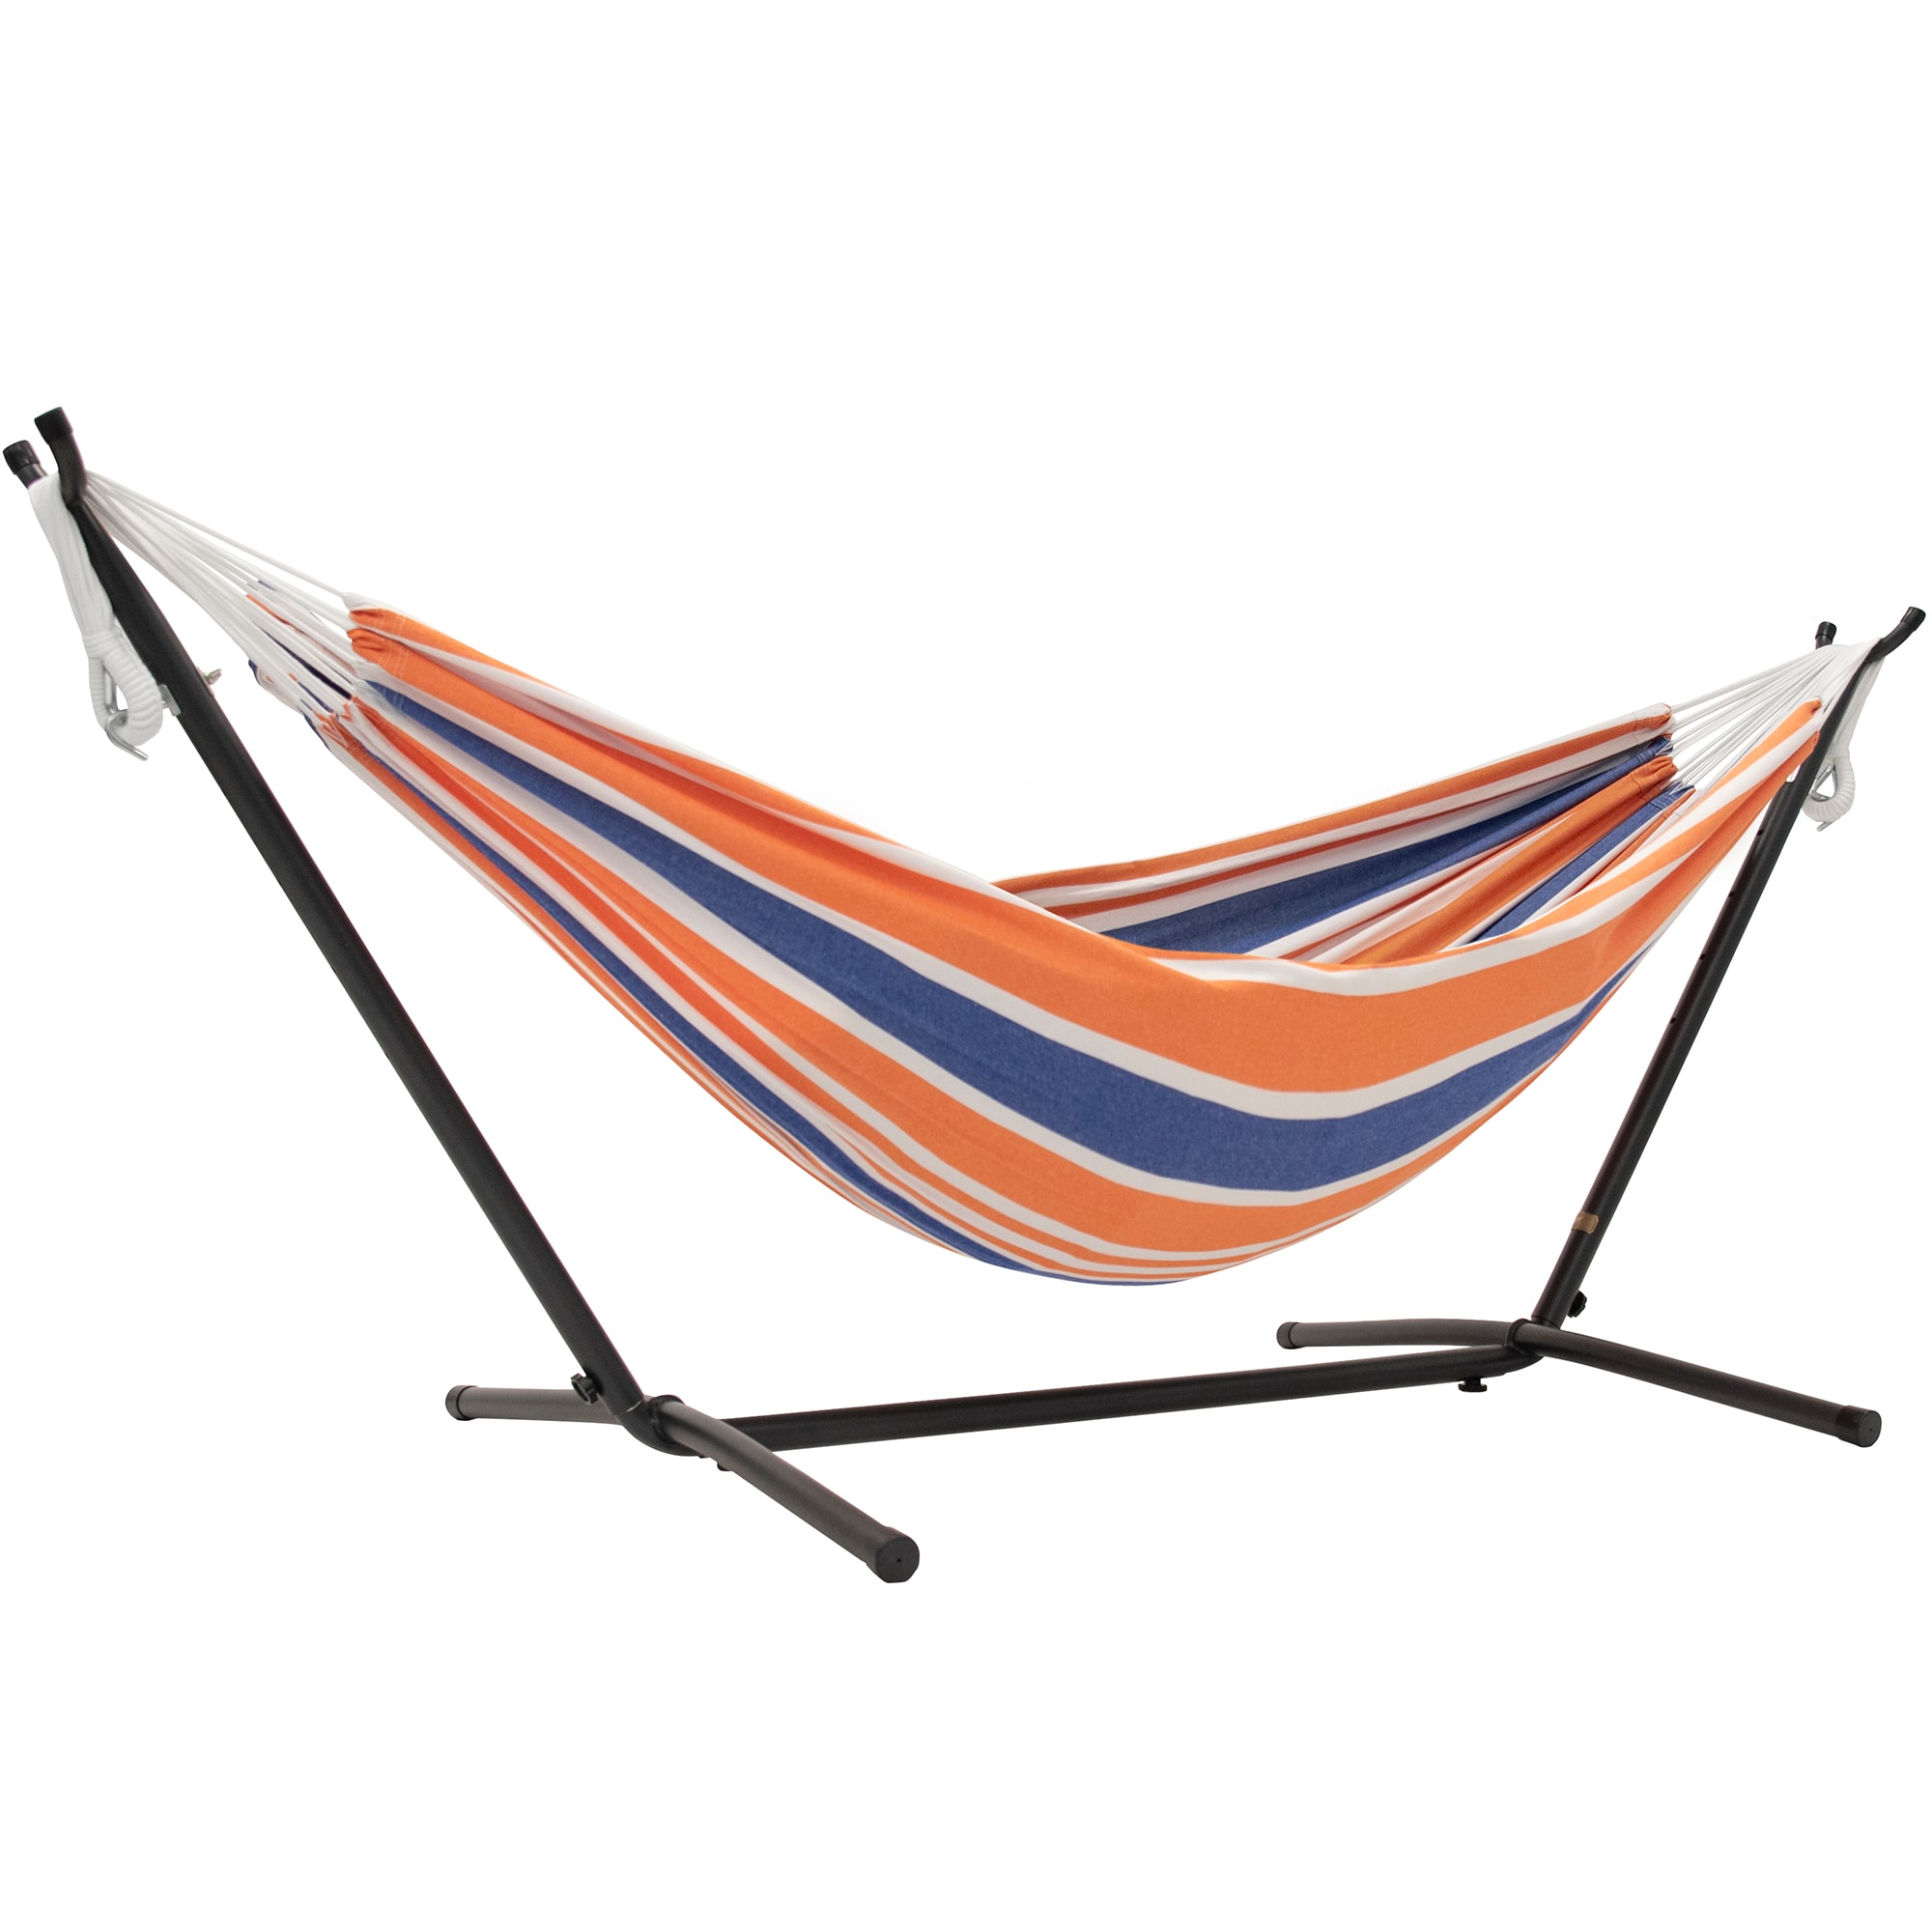 Vivere Hammock 9 ft Double Cotton Sturdy Construction Tropical w/ Hanging and 